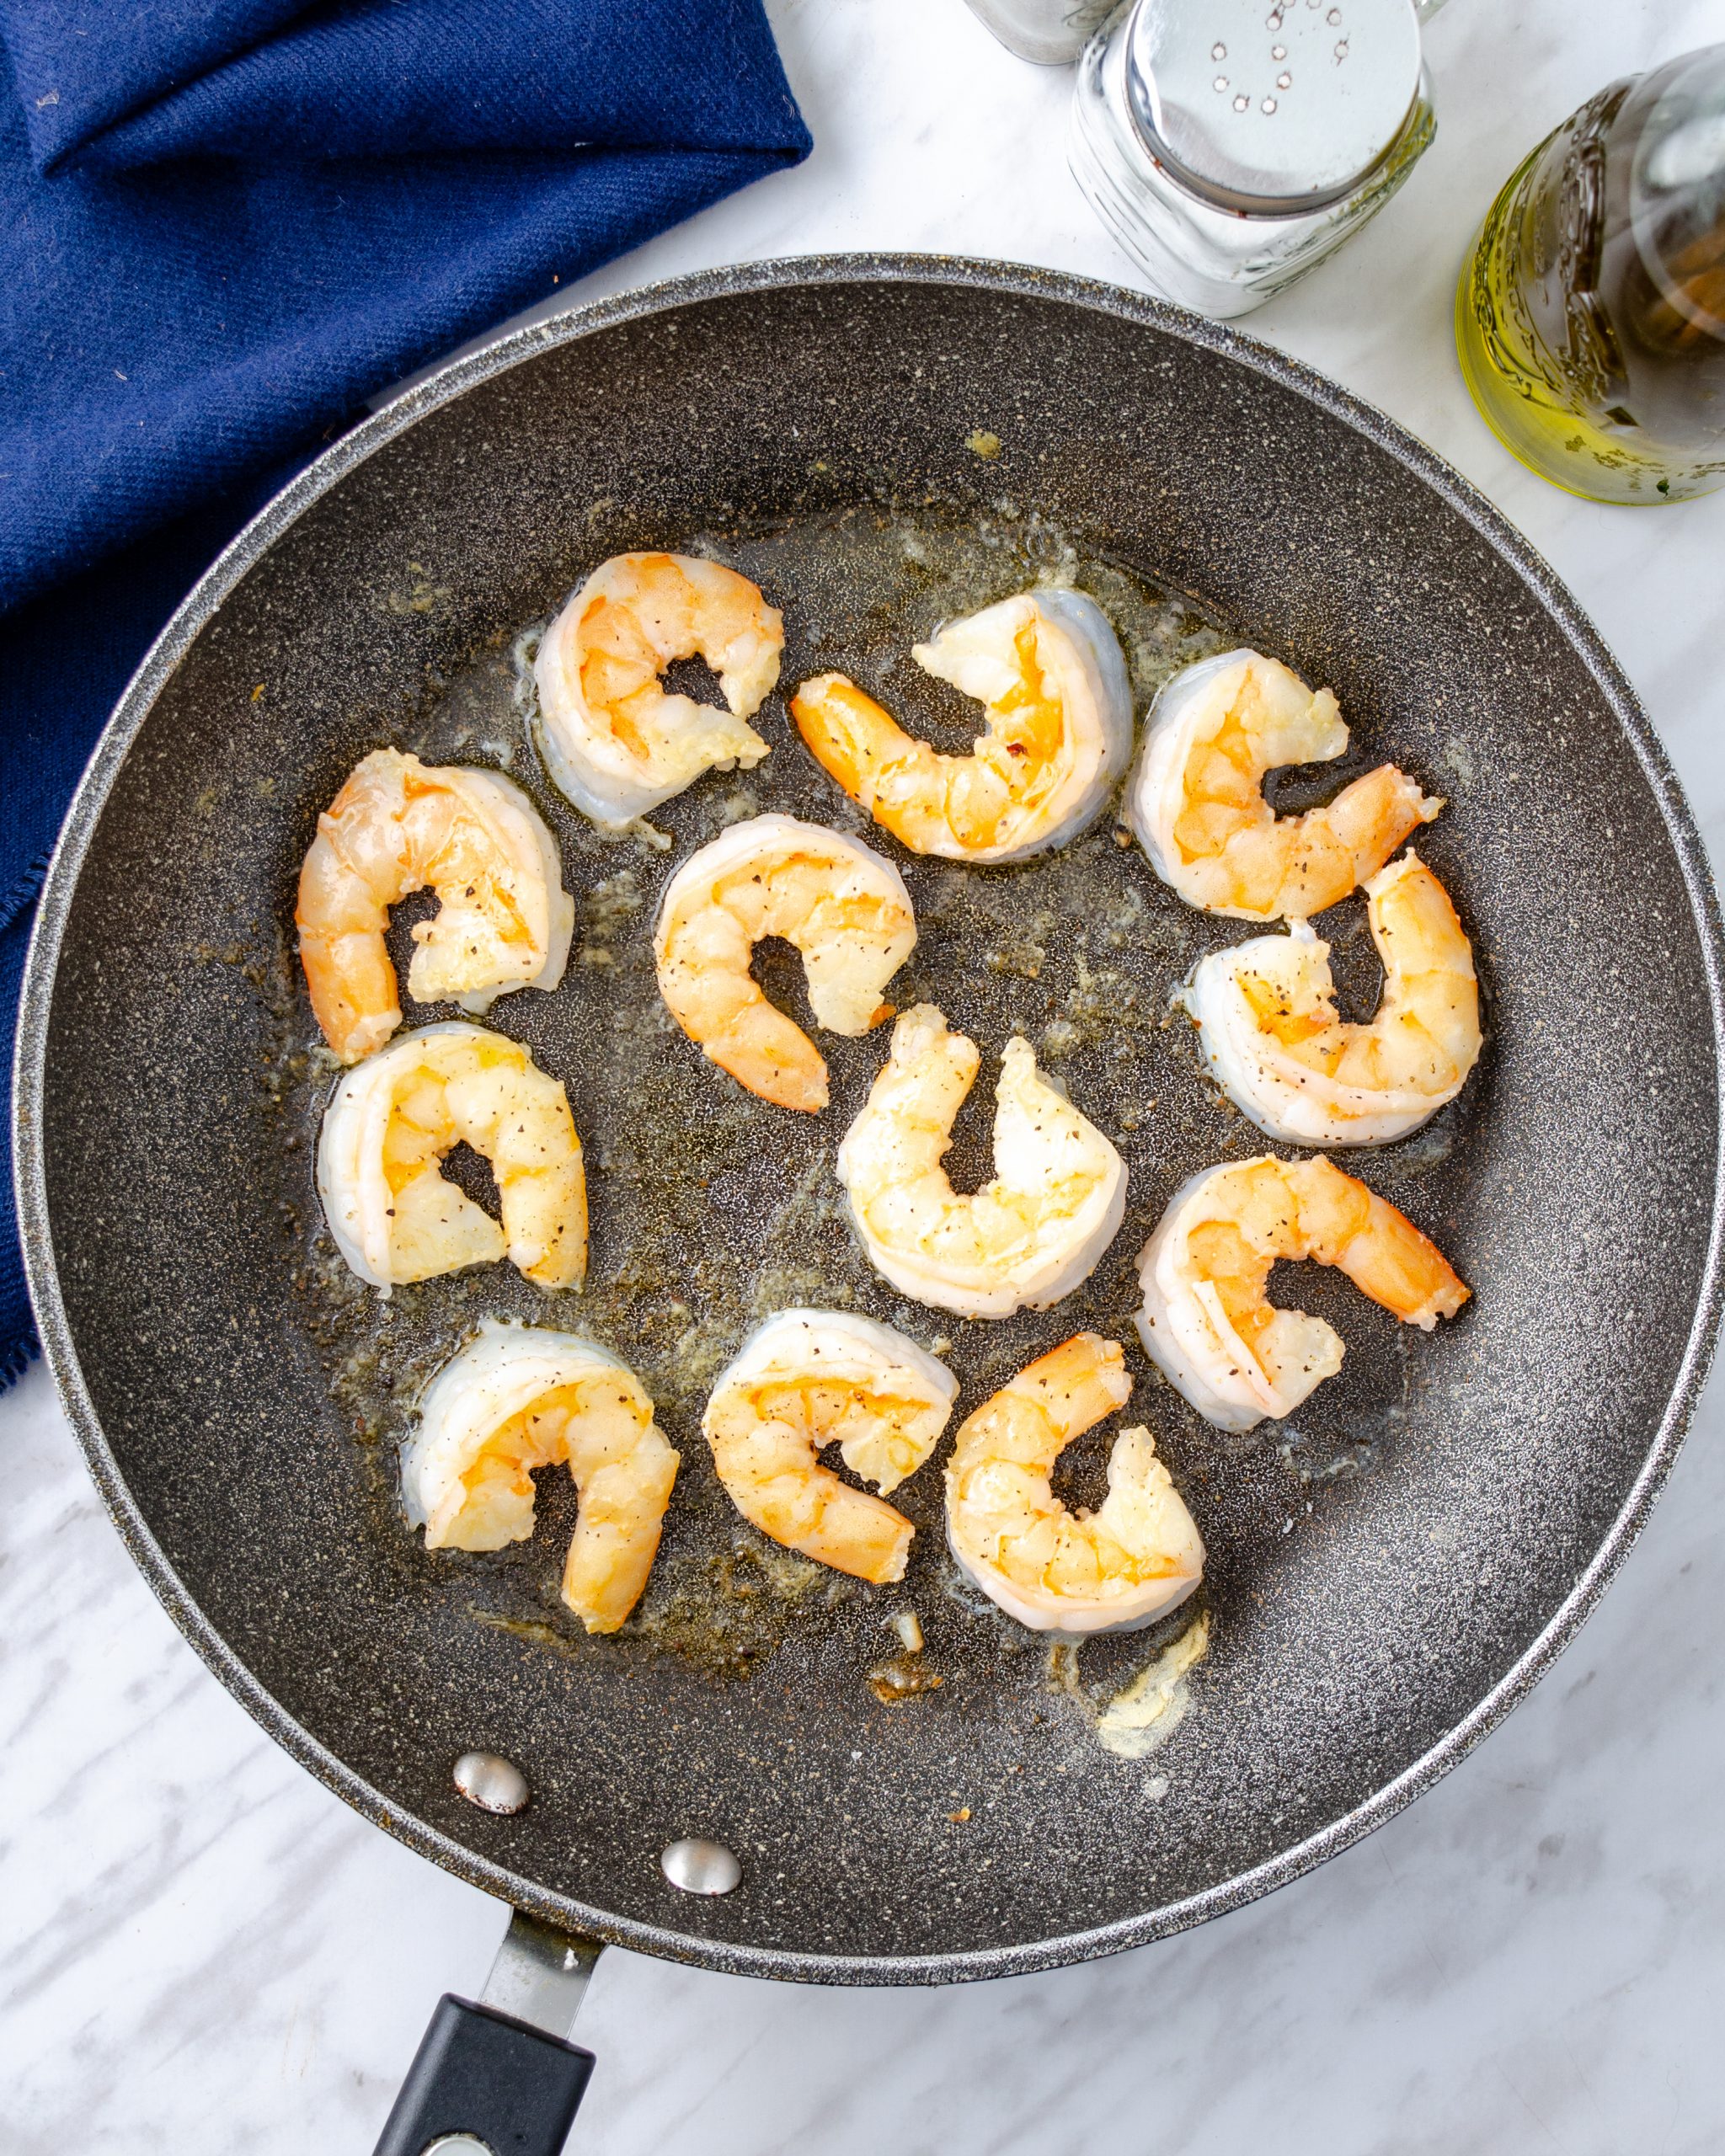 Season the shrimp with salt and pepper and saute in the skillet until cooked through.